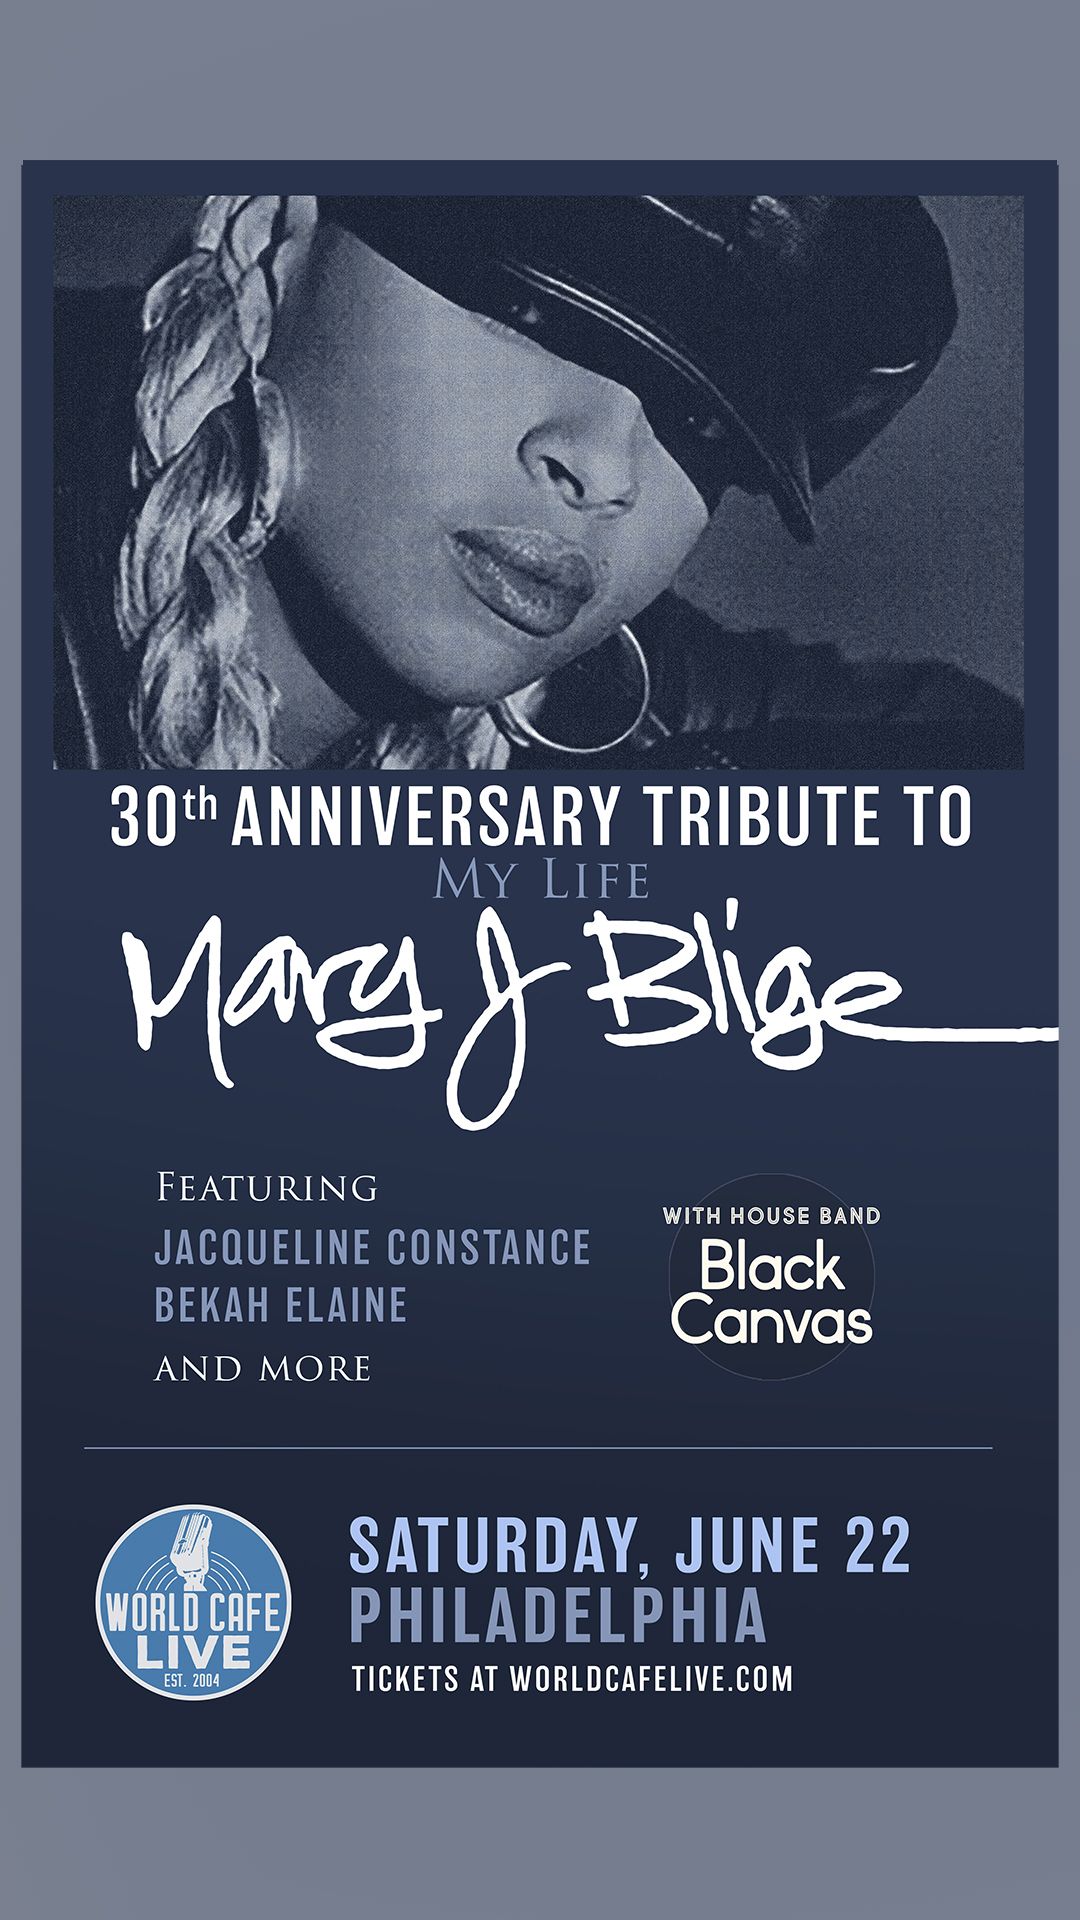 30th Anniversary Tribute to Mary J. Blige 'My Life' at World Cafe Live Philly 6.22